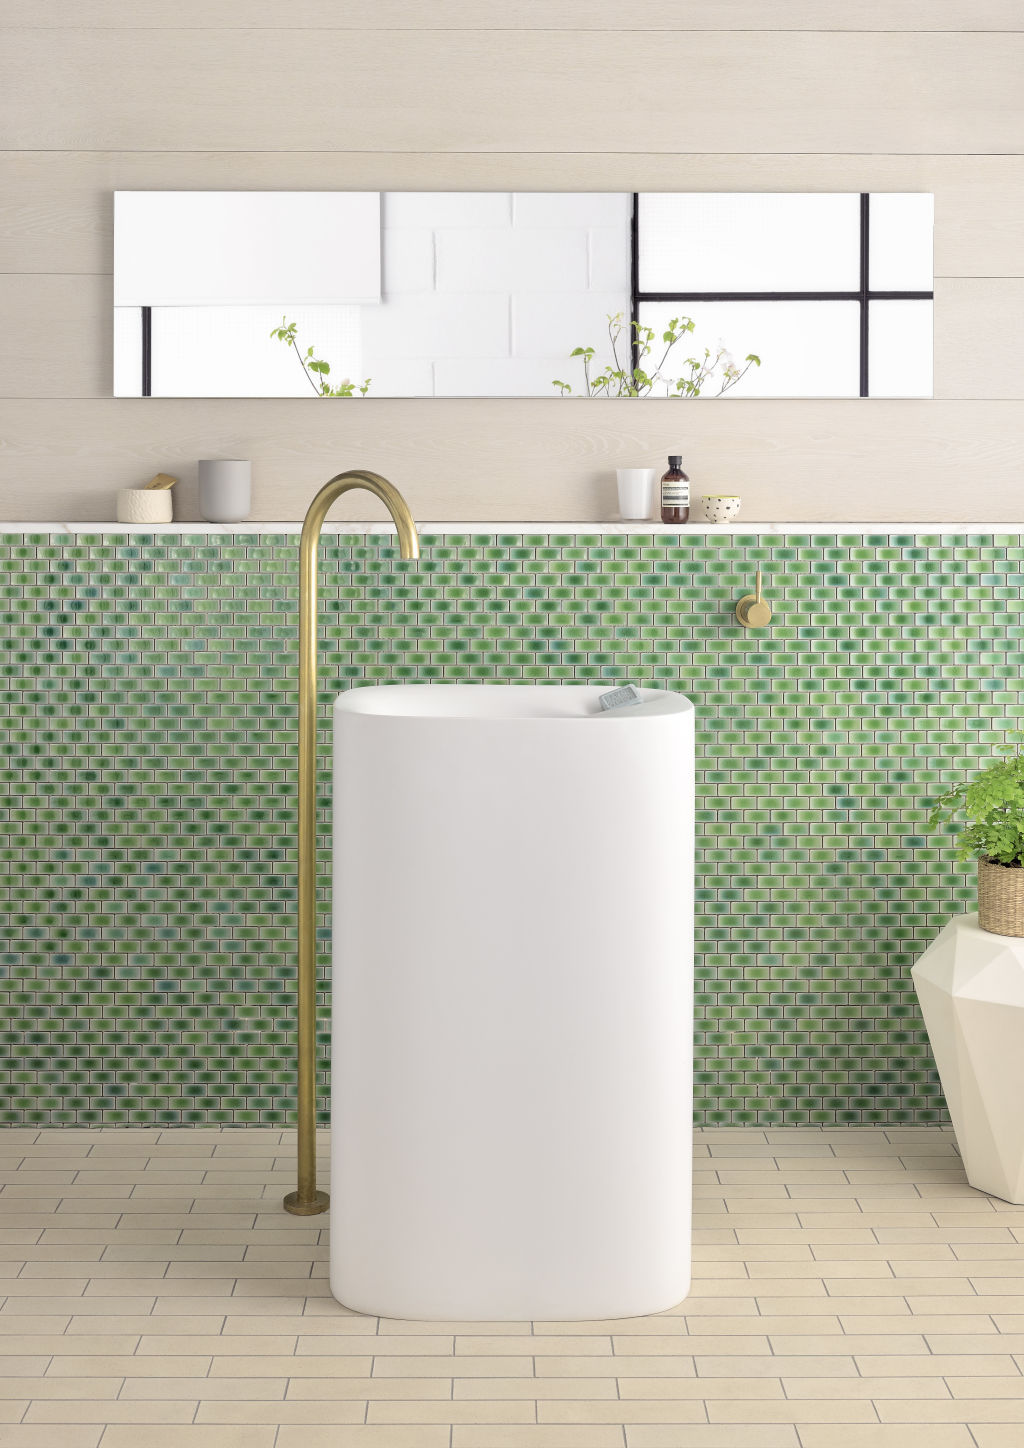 INAX tile collection by Artedomus. Photo: Supplied